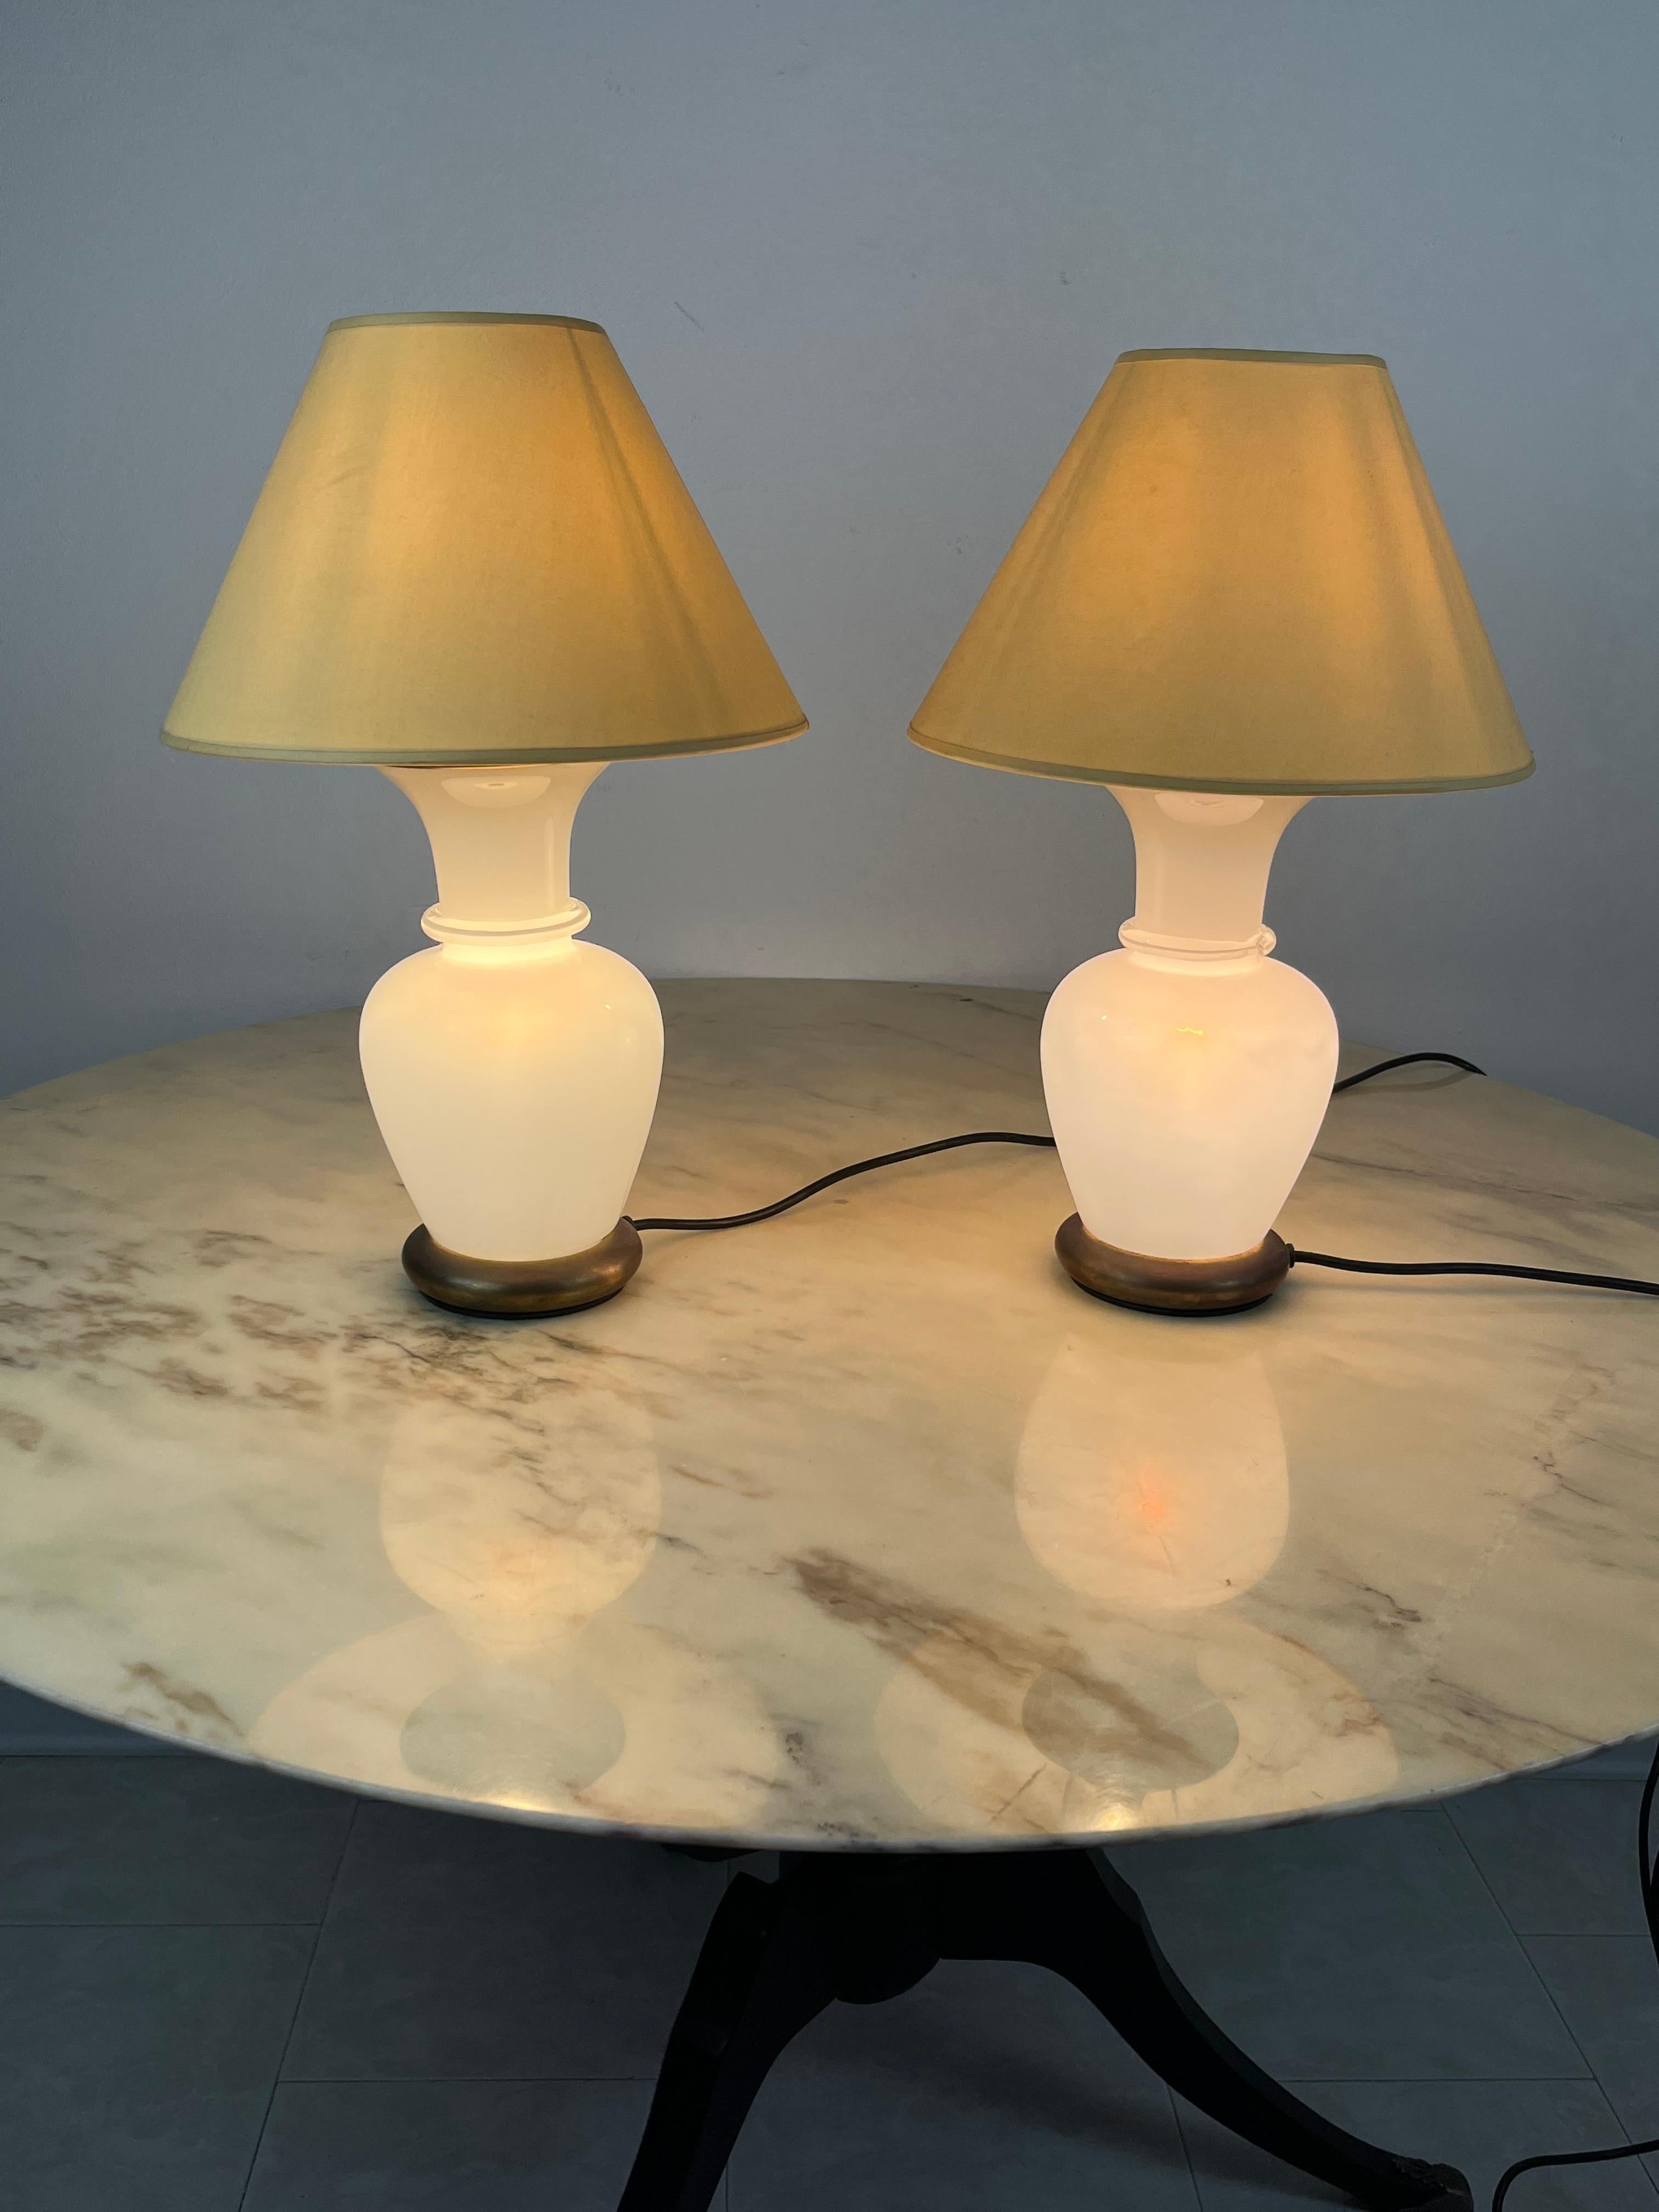 Italian Set of 2 Murano Glass and Brass Table Lamps, F. Fabbian, Italy, 1970s For Sale